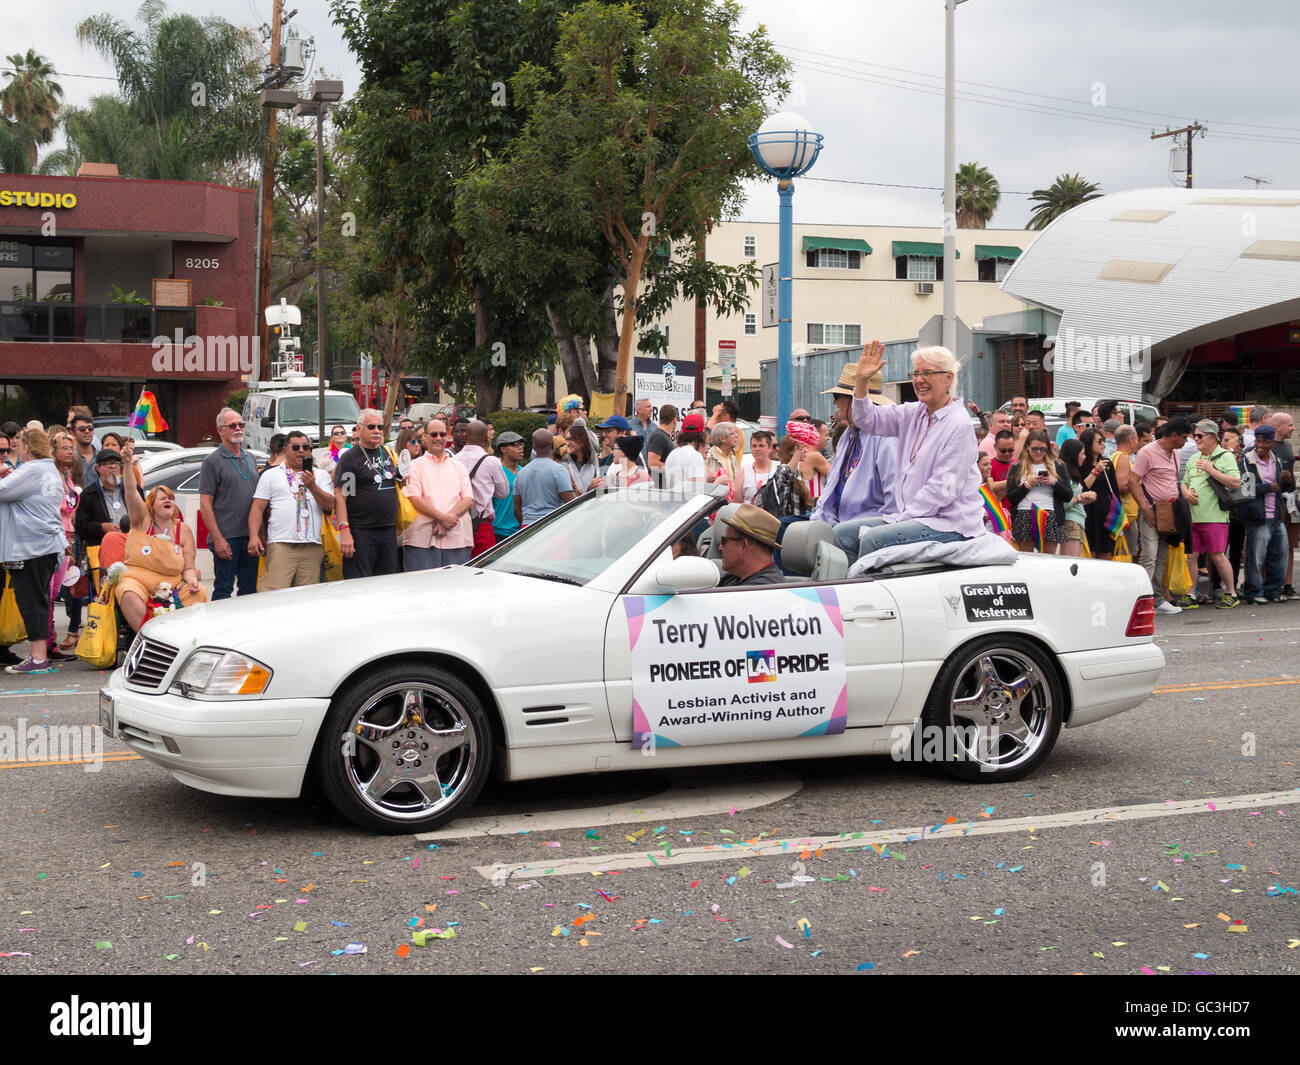 Terry Wolverton parading in a car during LA Pride Parade 2016 Stock Photo